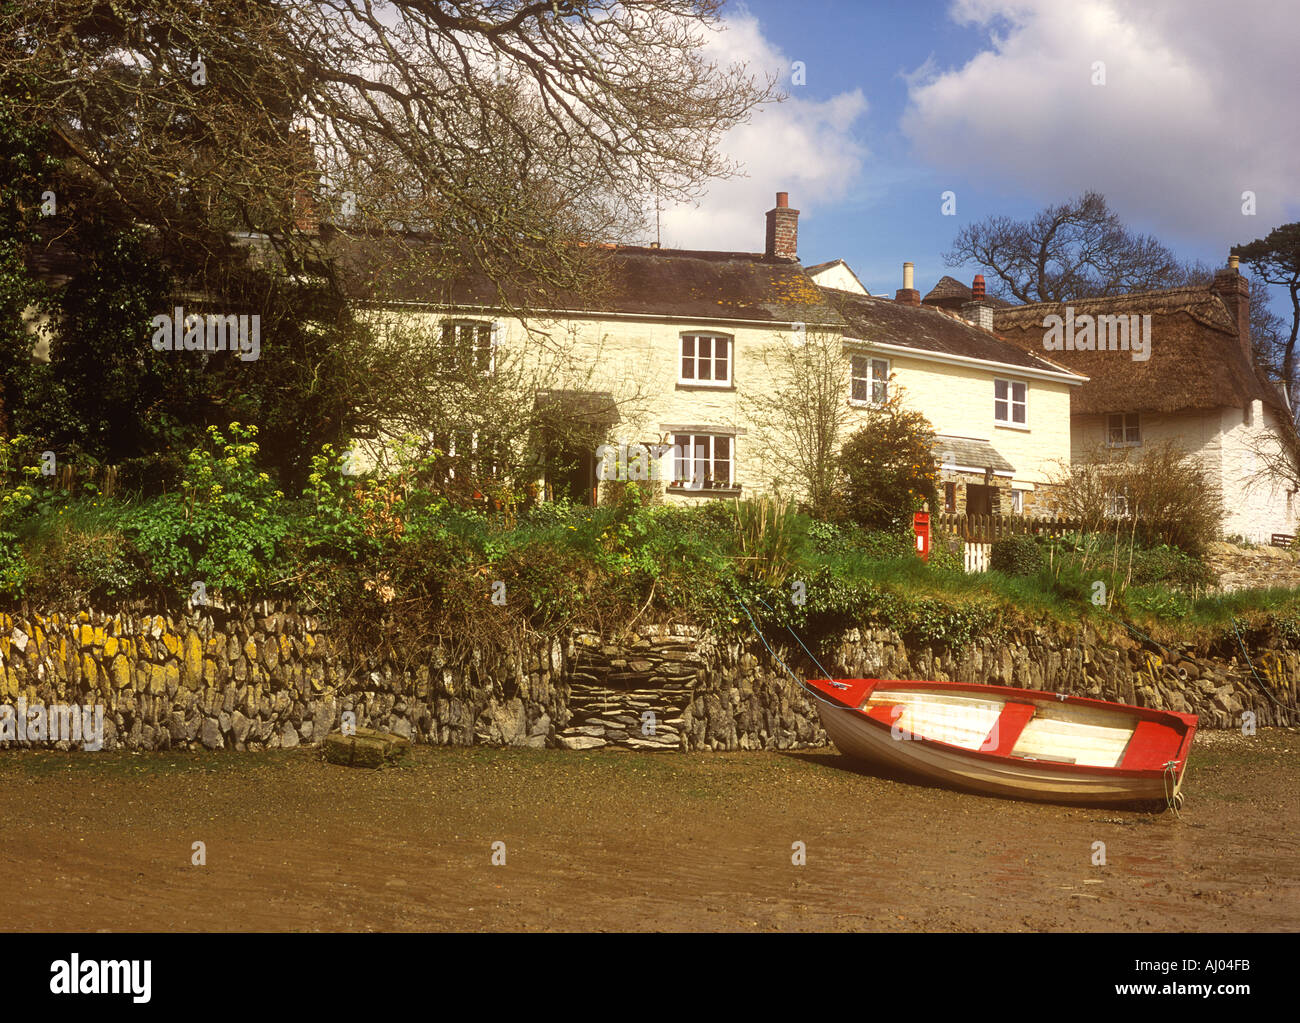 Cottages and rowing boat at low tide on the Tresillian river in the village of St Clement near Truro in Cornwall, UK Stock Photo